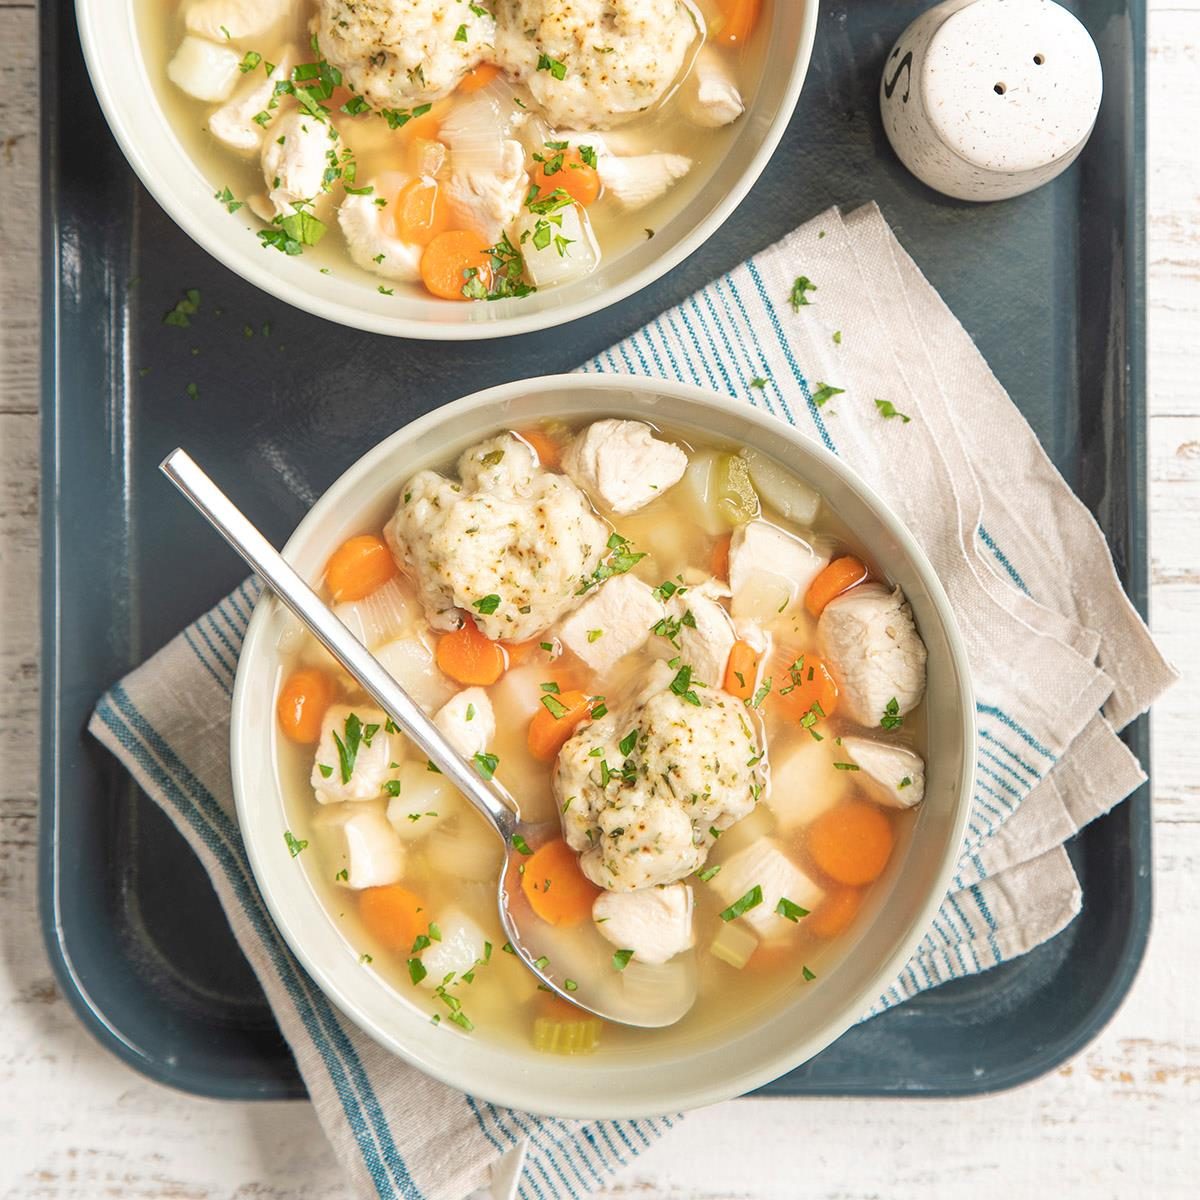 Old Fashioned Chicken And Dumplings Exps Ft23 31688 St 1 12 1